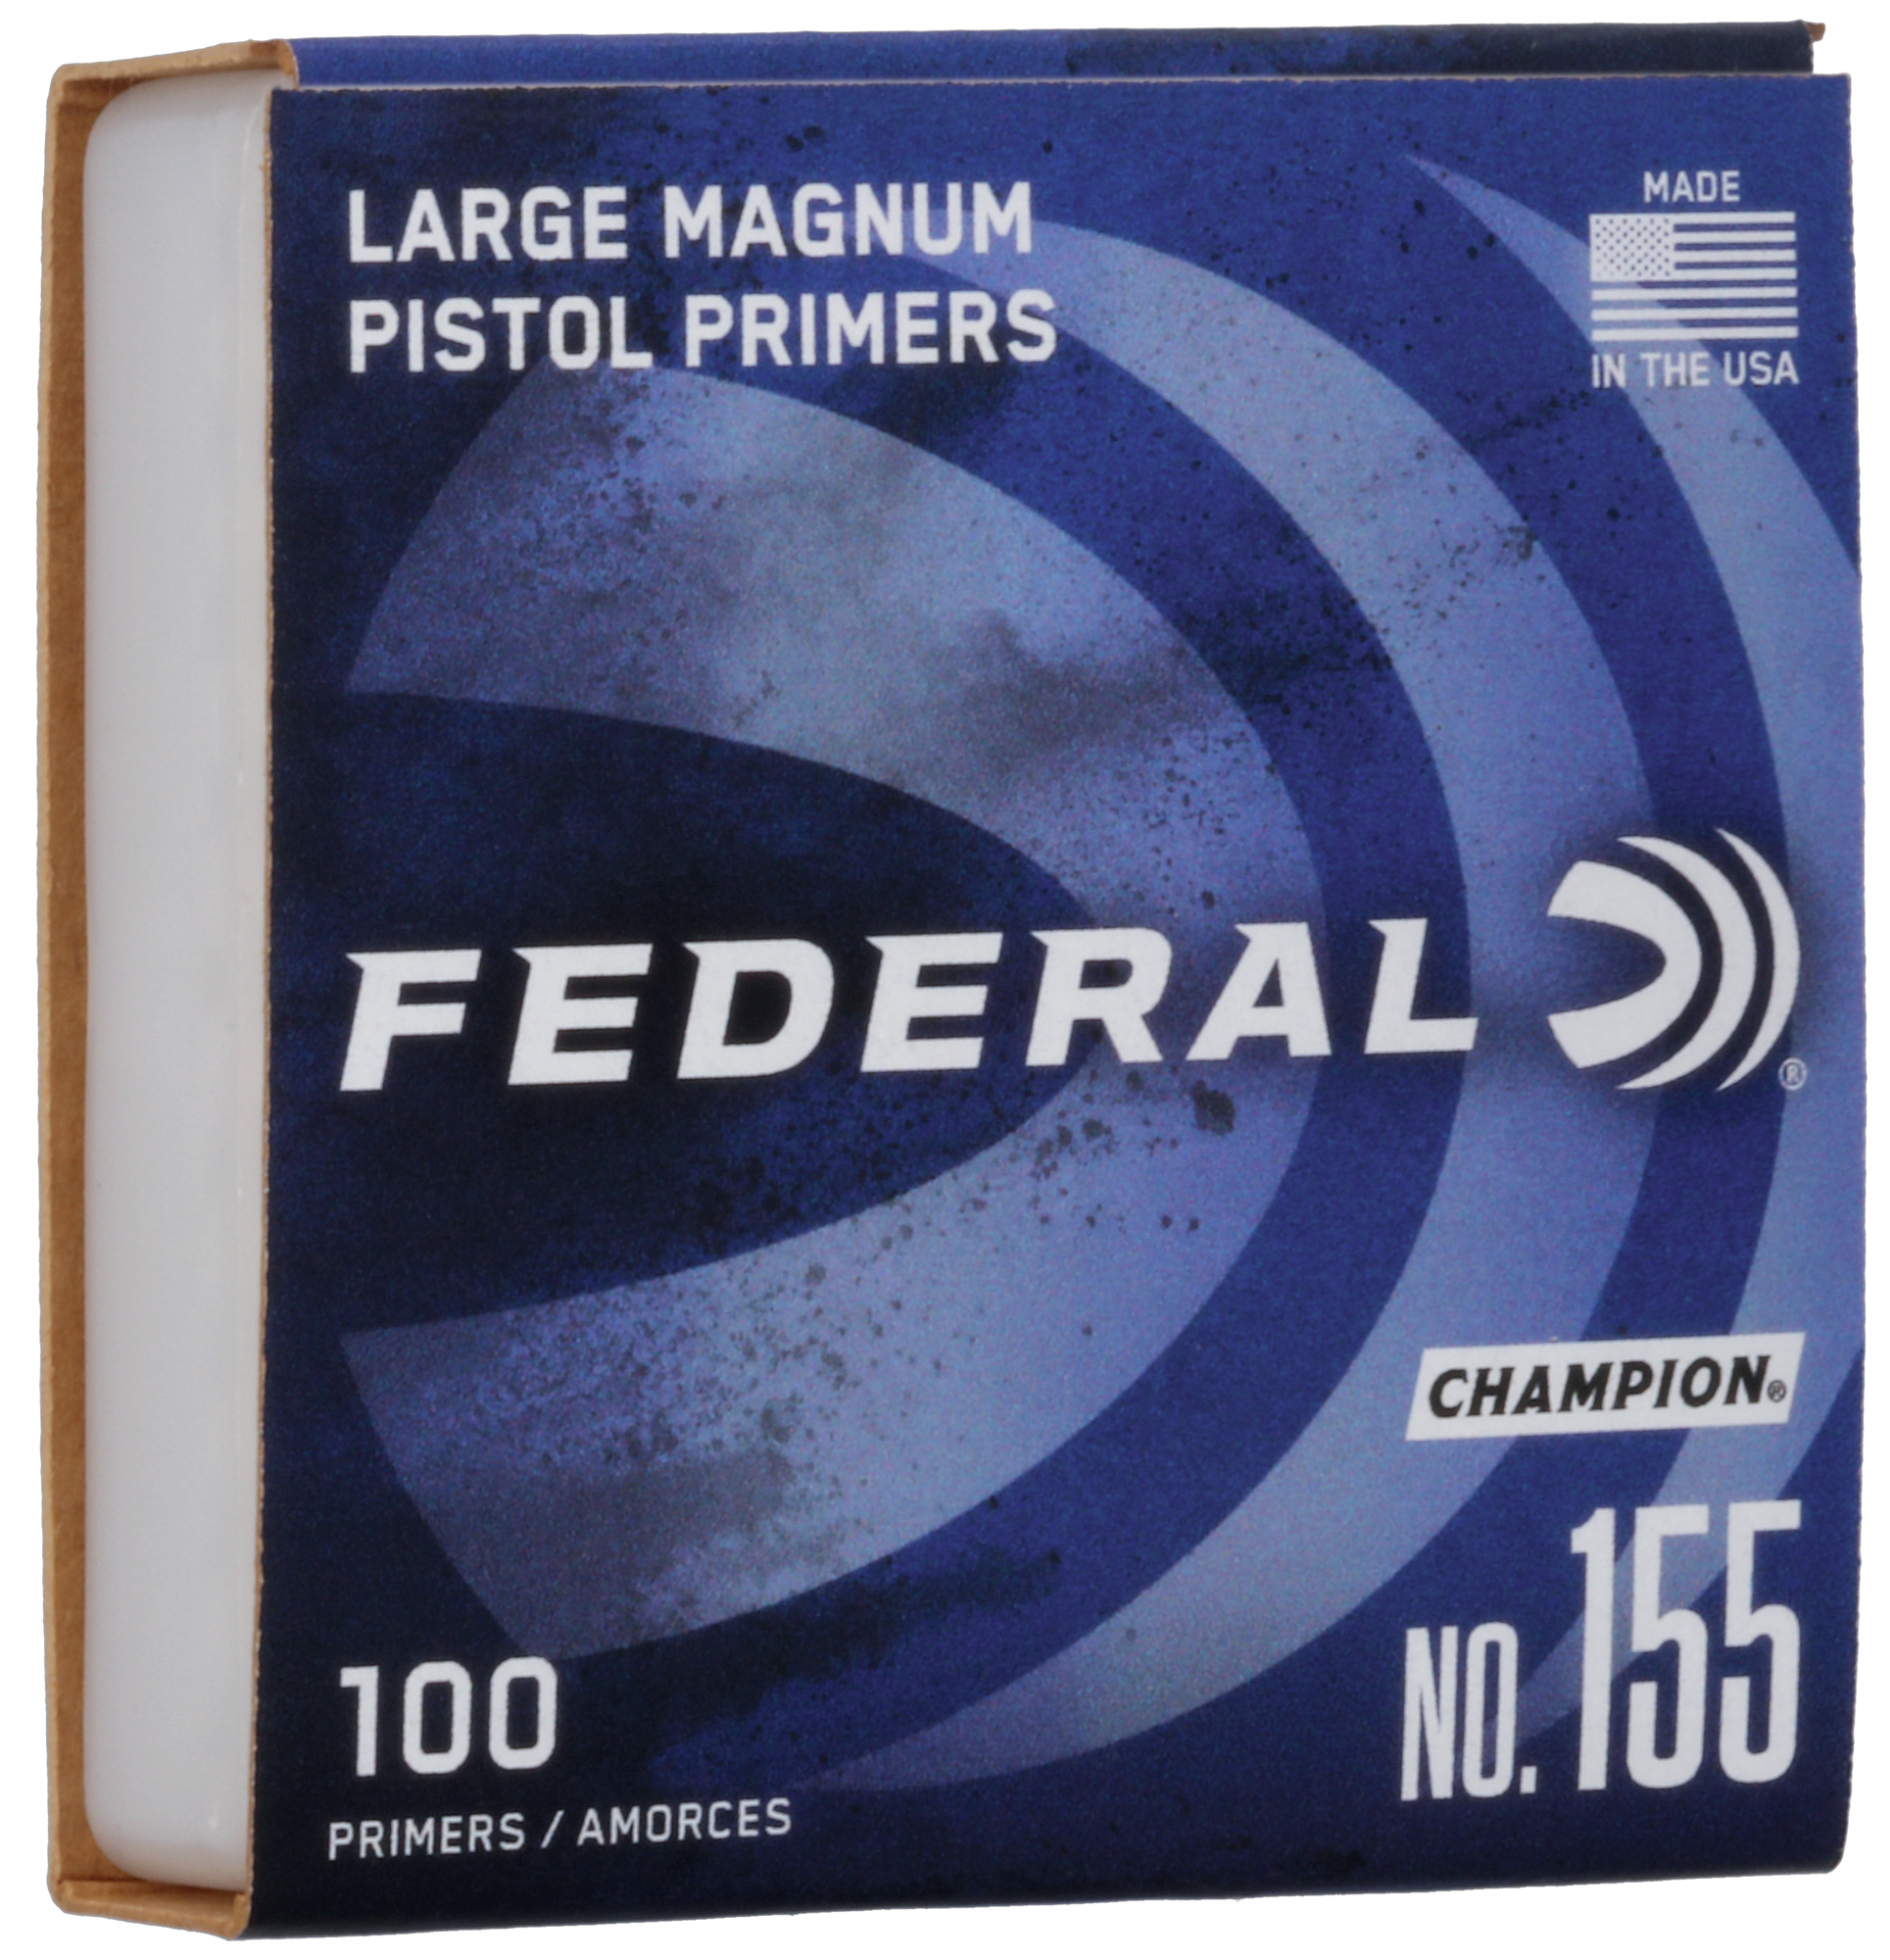 Federal 155 Large Pistol Magnum Primers Brick 1000 (10 Trays of 100) #155-img-0